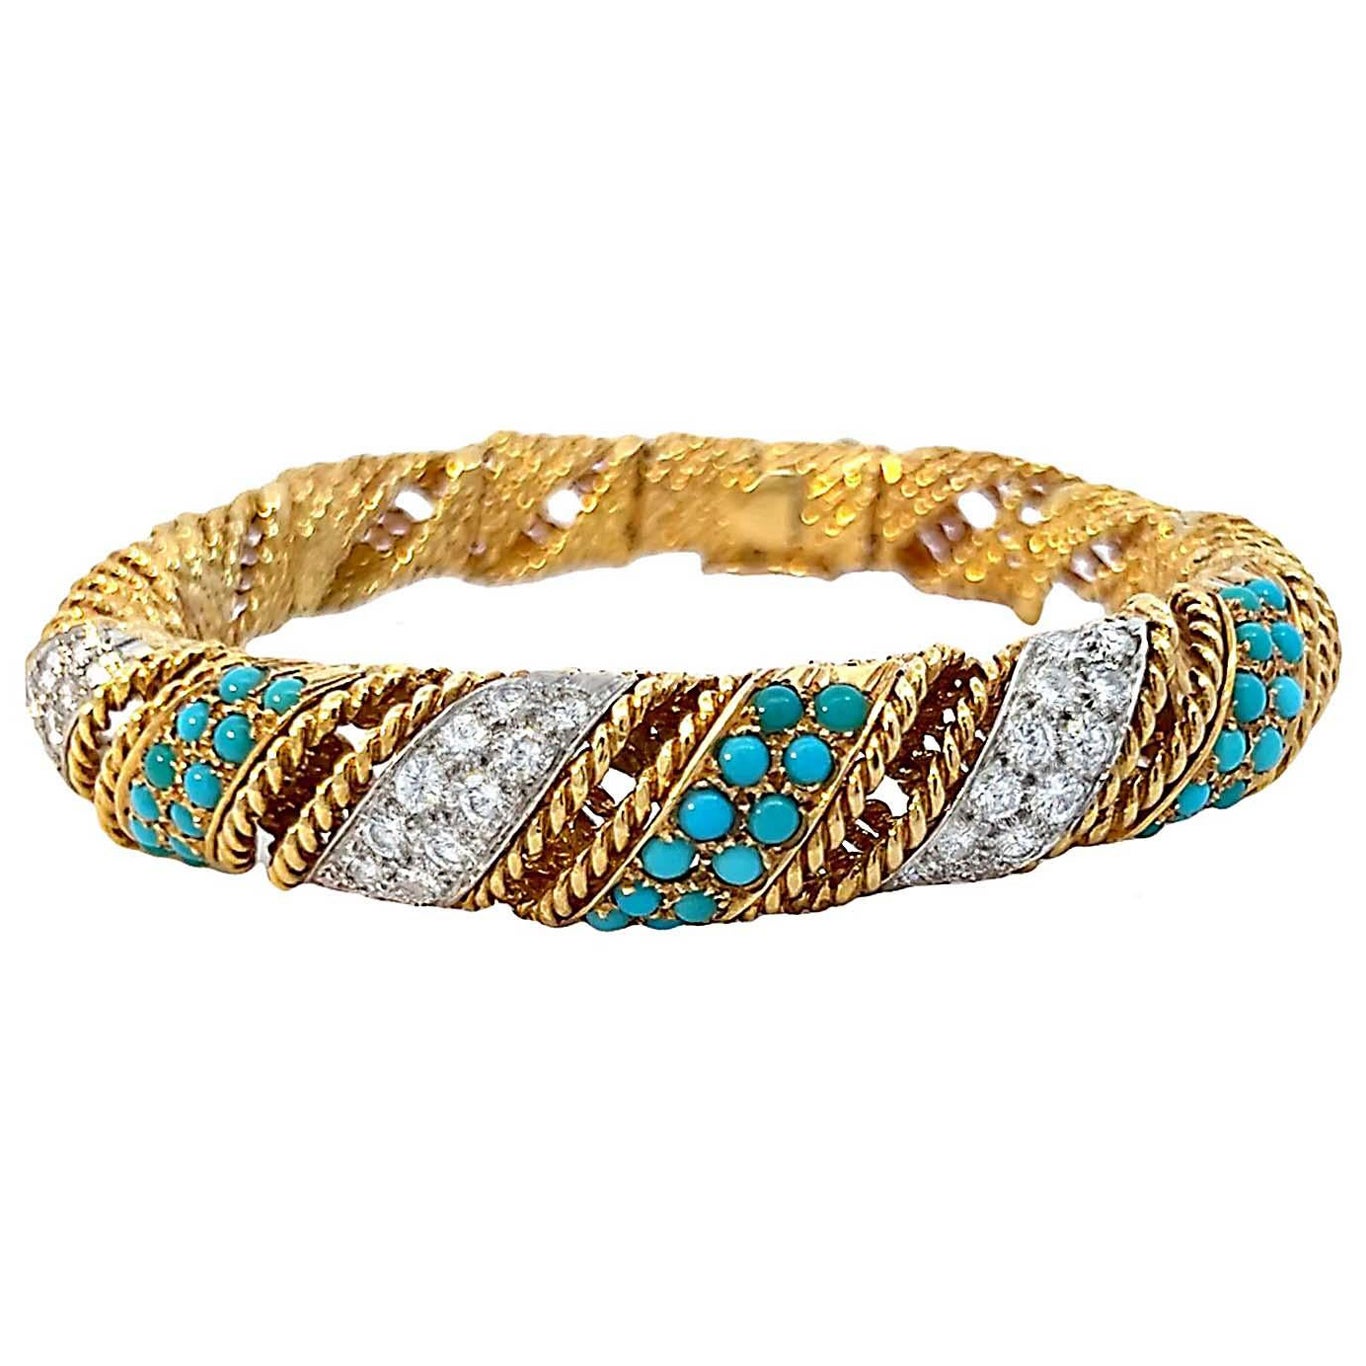 Vintage Turquoise and Dimond 18k Cuff Bracelet